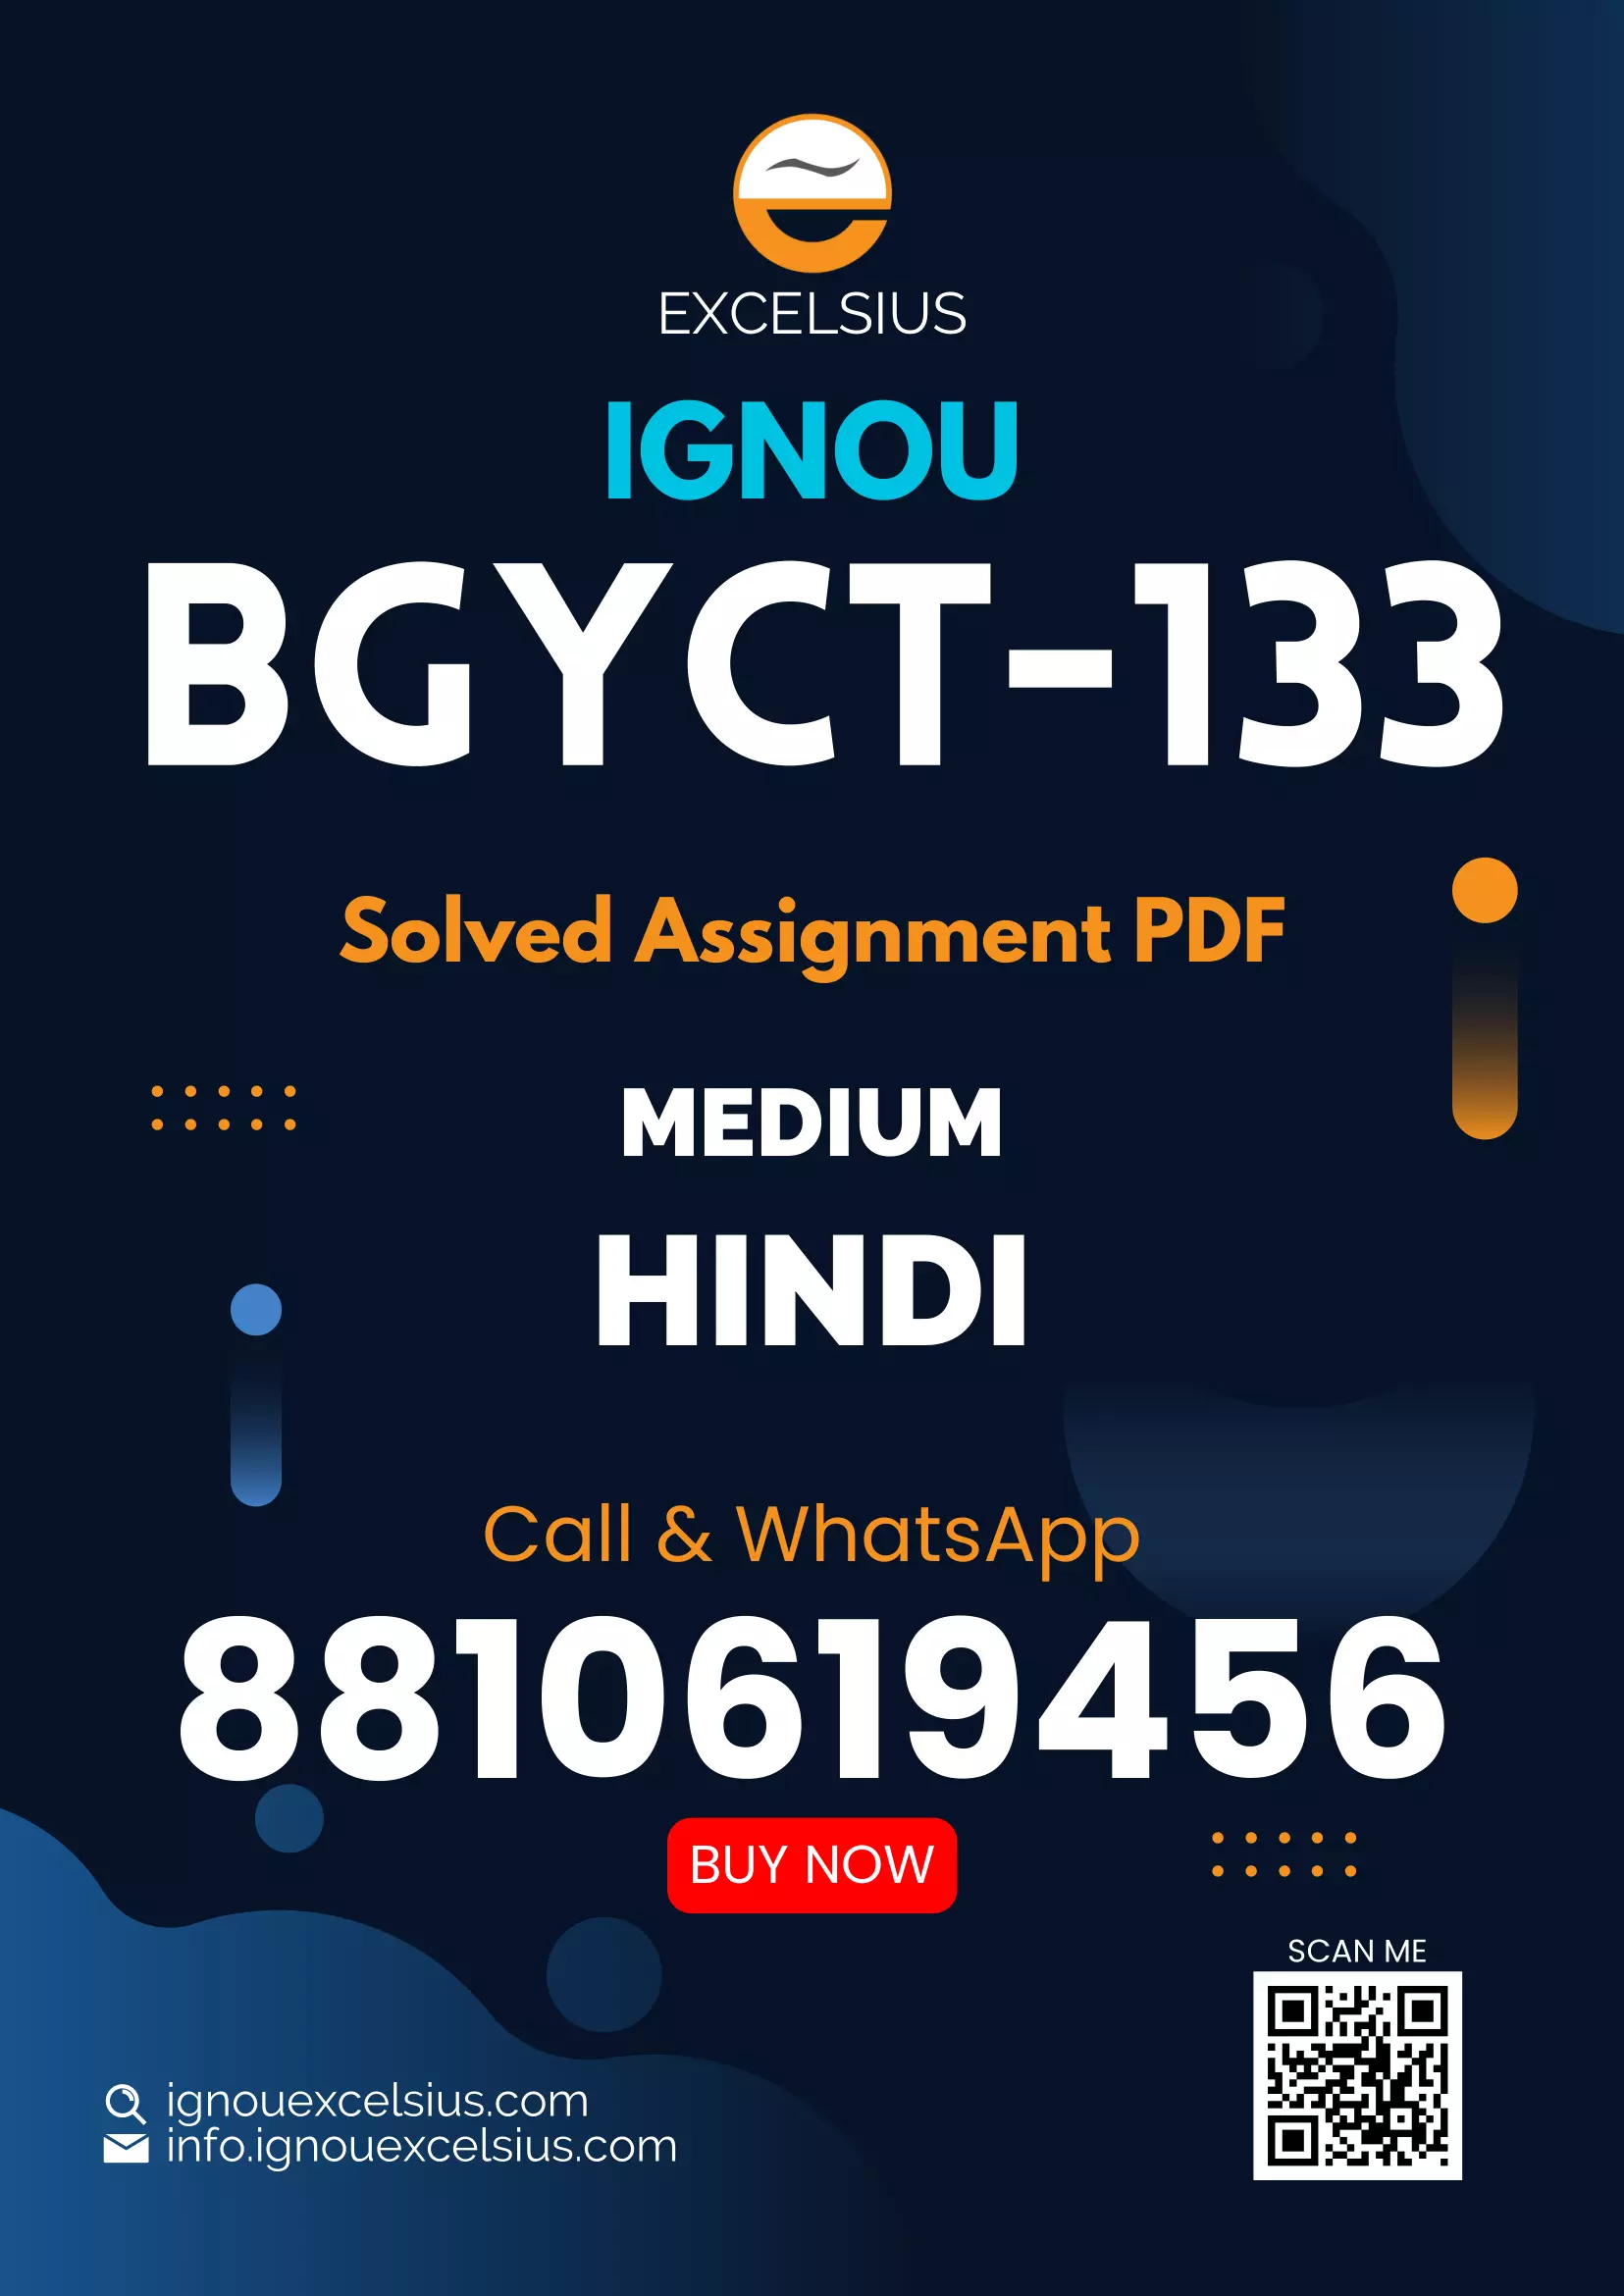 IGNOU BGYCT-133 - Crystallography, Mineralogy and Economic Geology, Latest Solved Assignment-January 2023 - December 2023